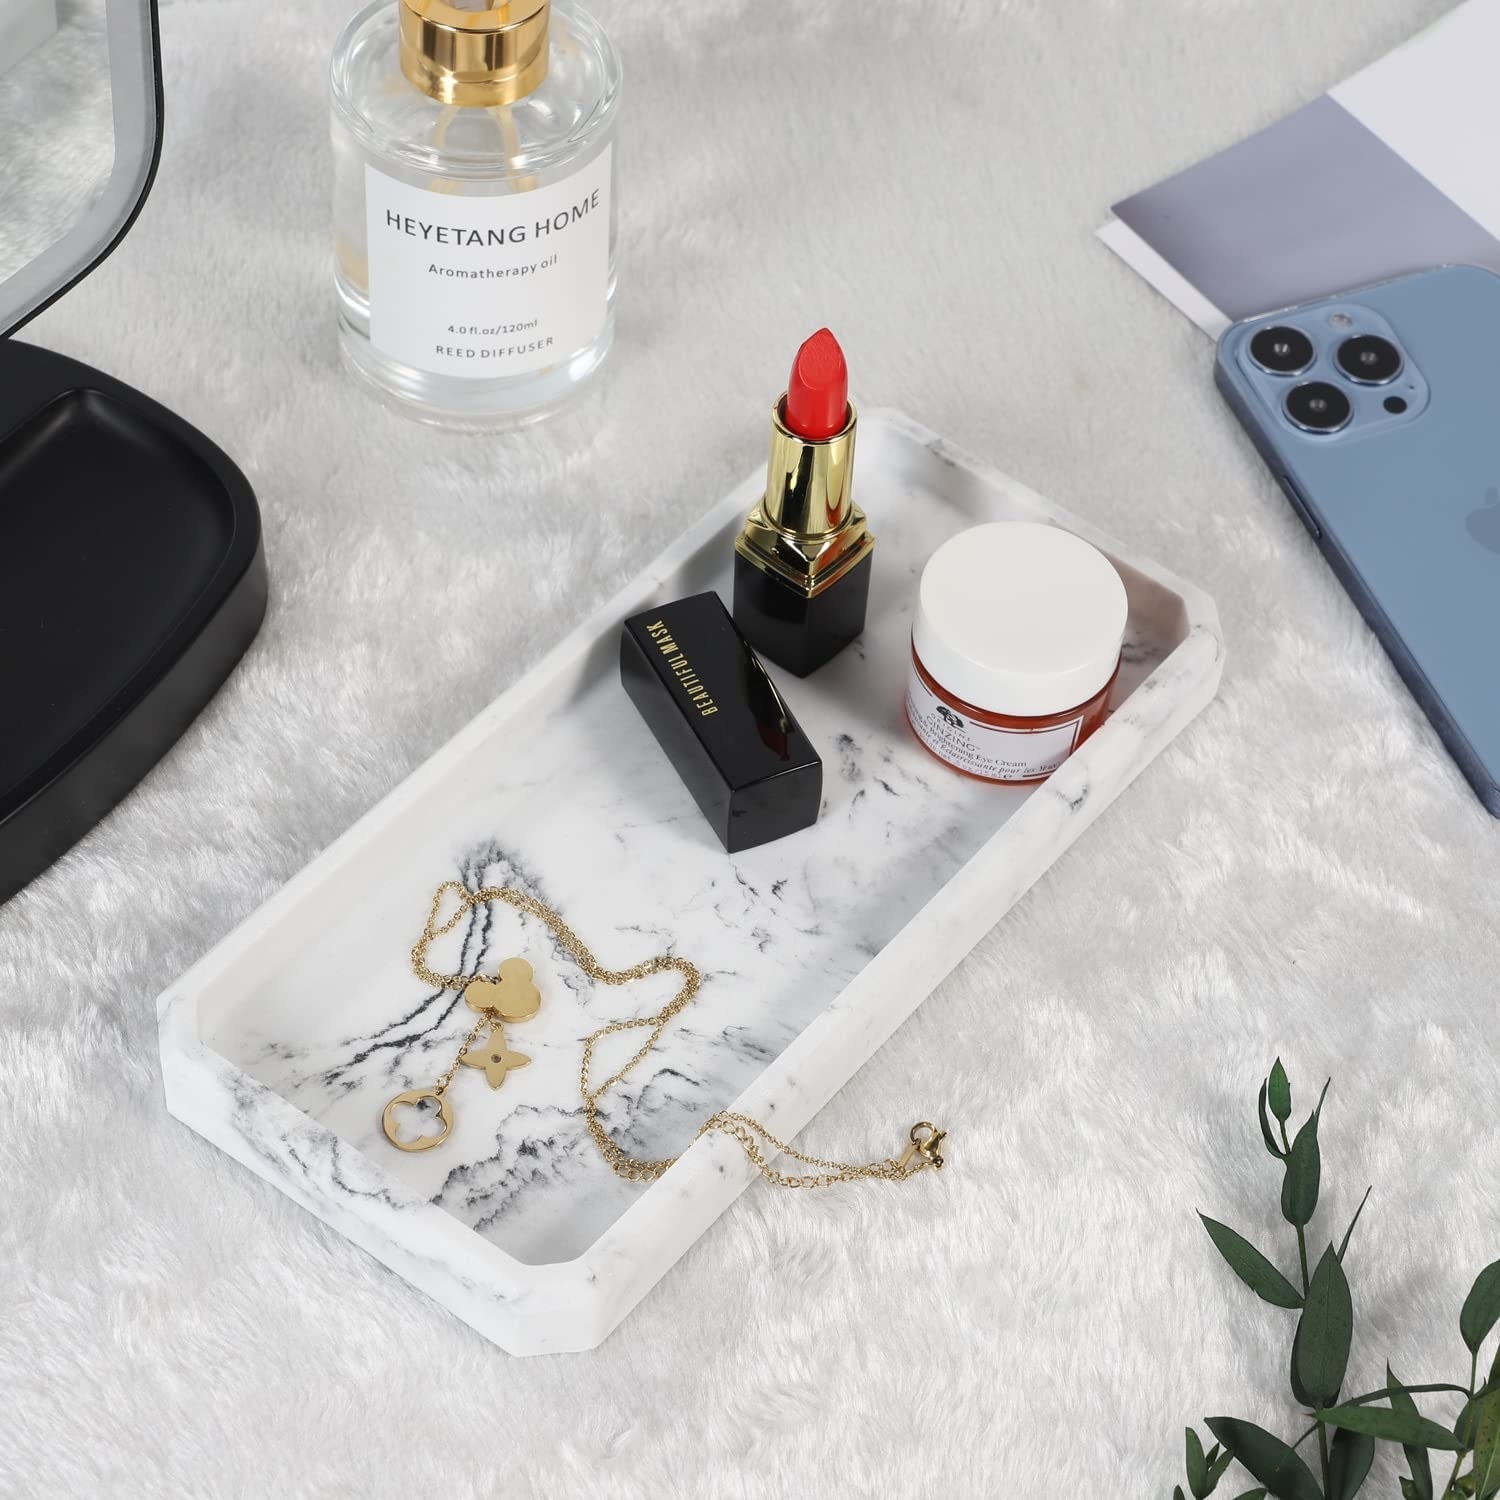 The tray with a necklace, lotion, and lipstick on it